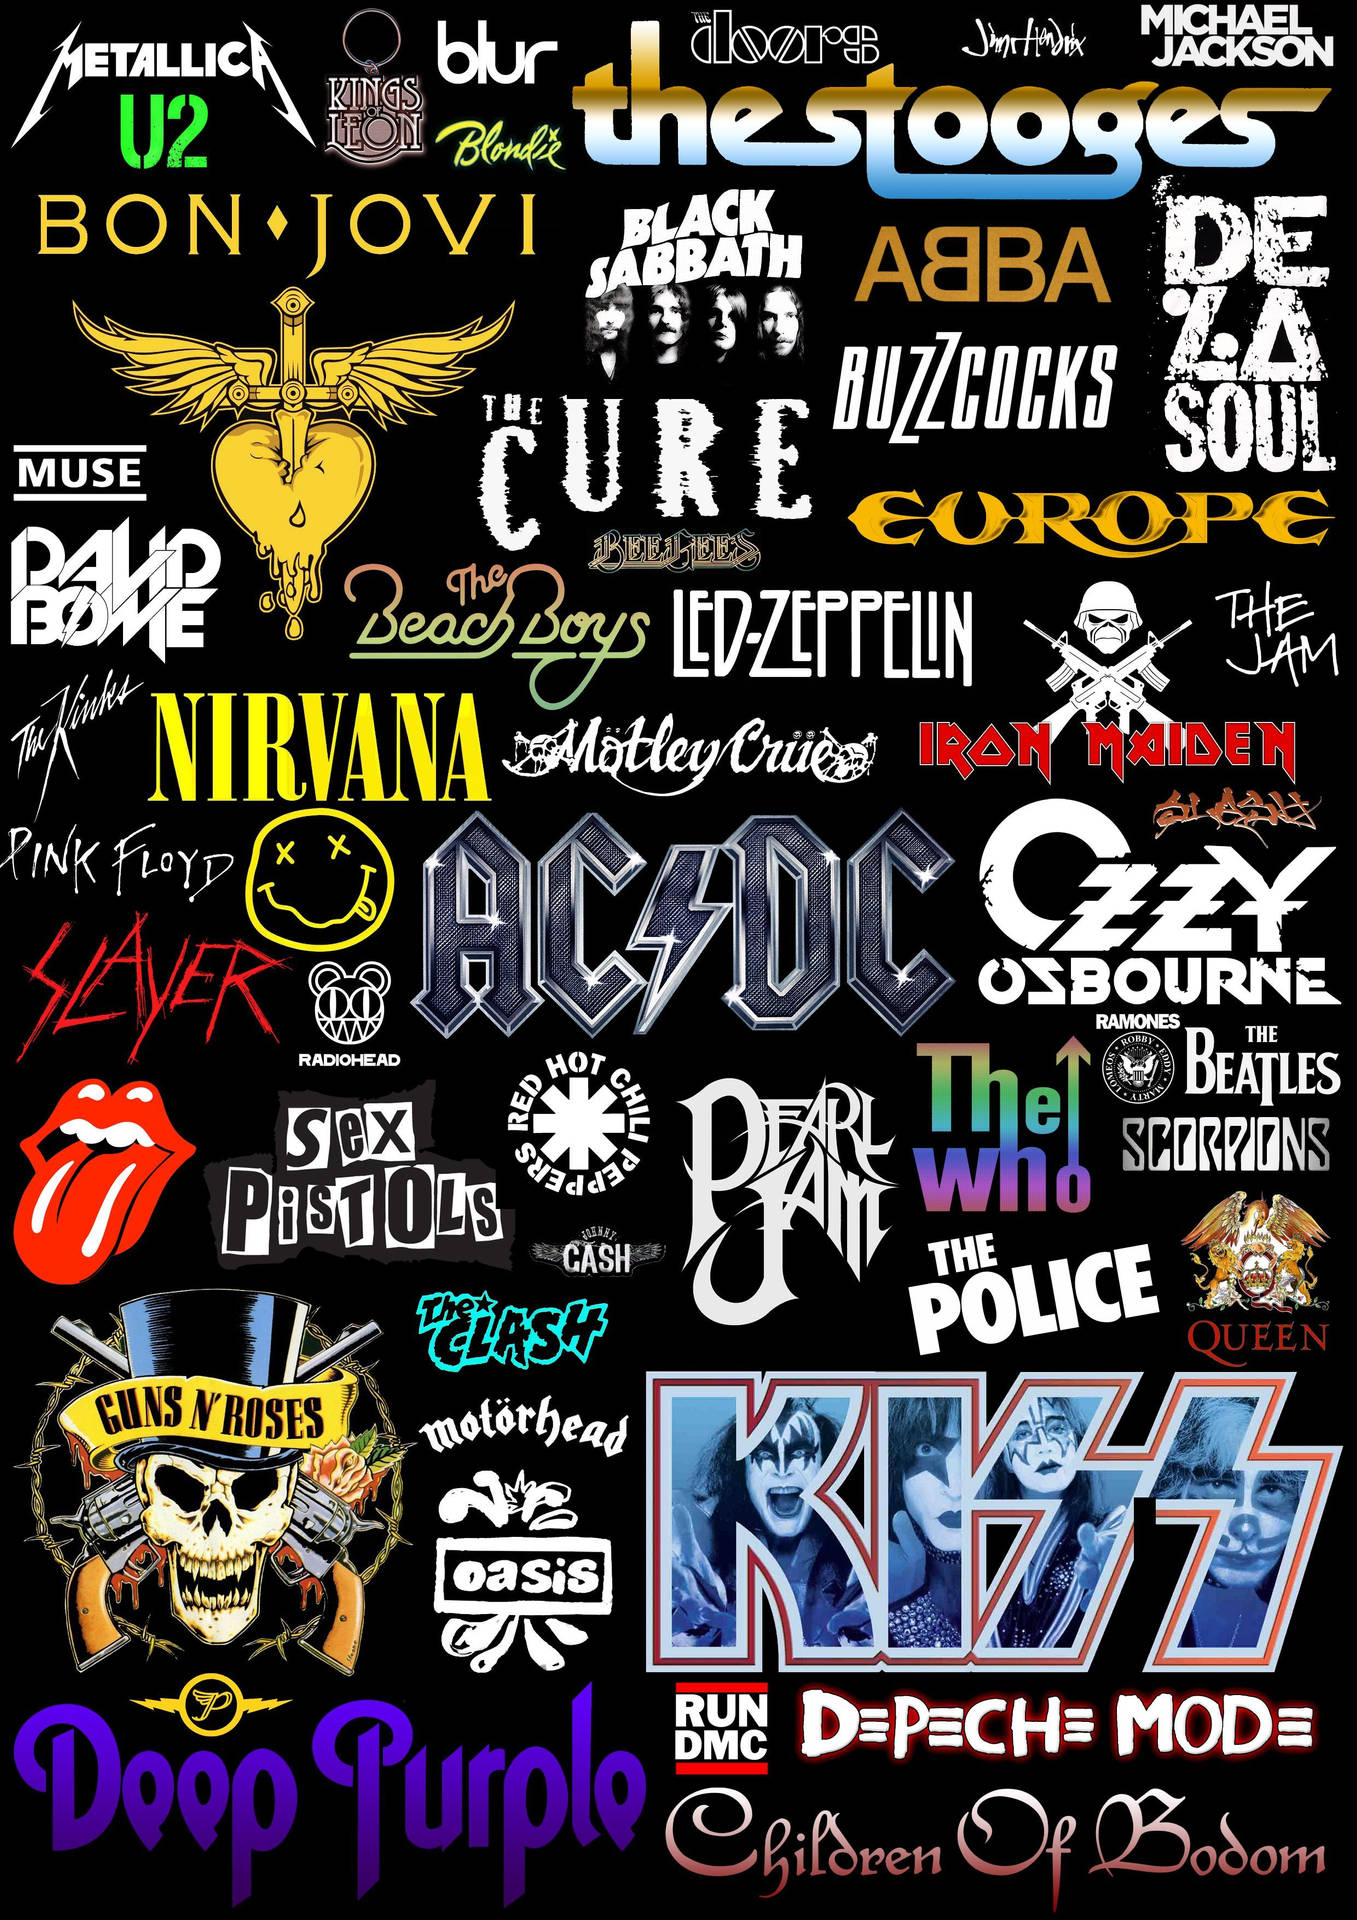 "Feel the nostalgia with 80's Rock!" Wallpaper